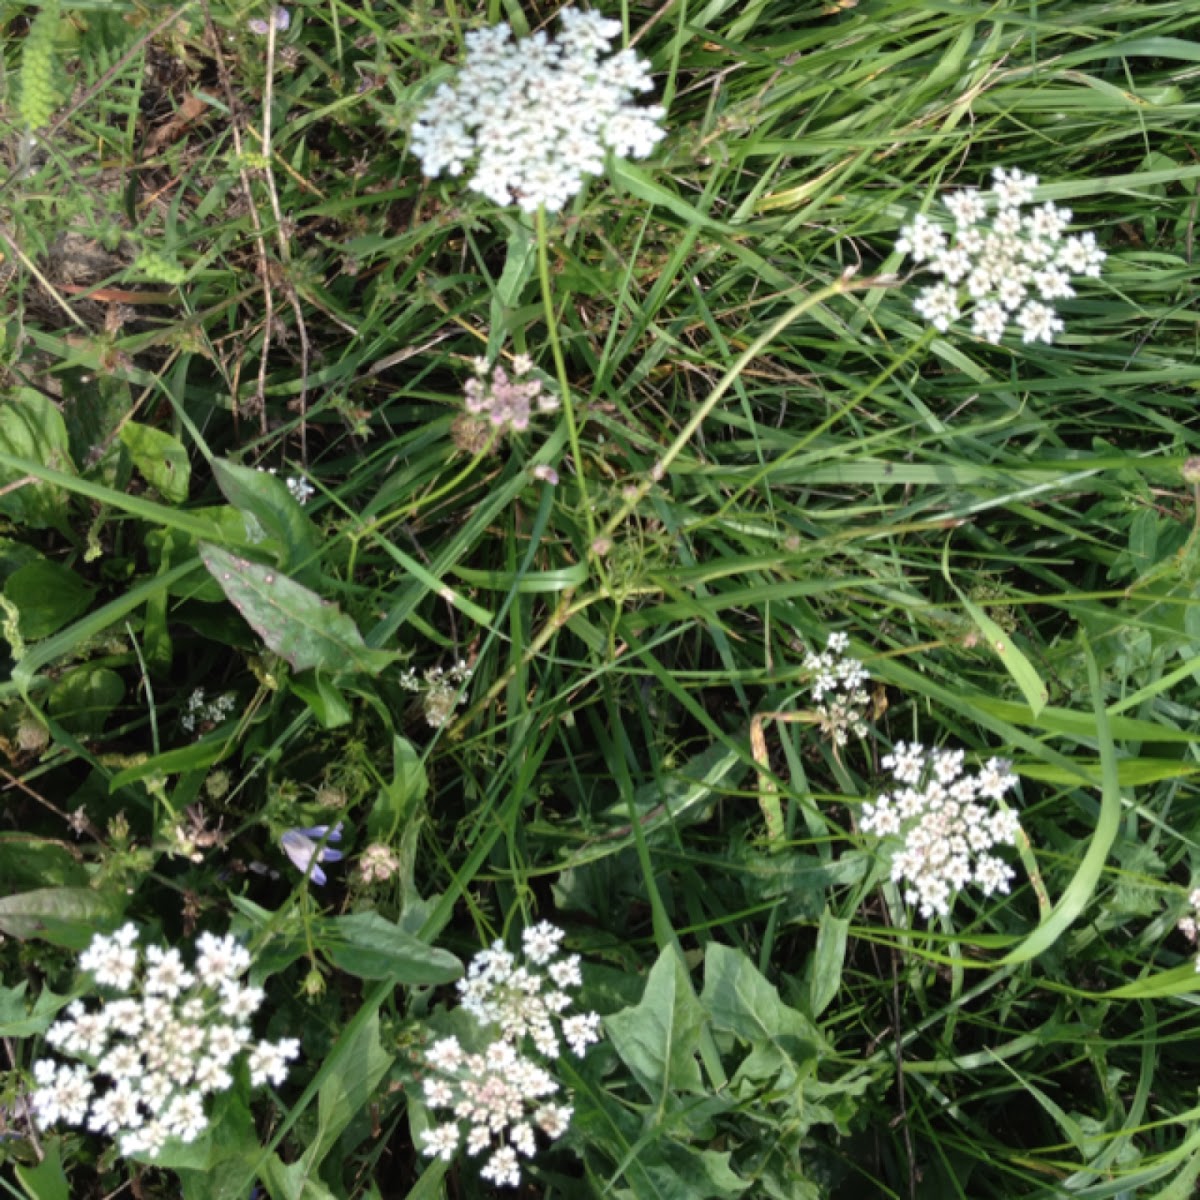 Queen Anne's Lace (wild carrot)